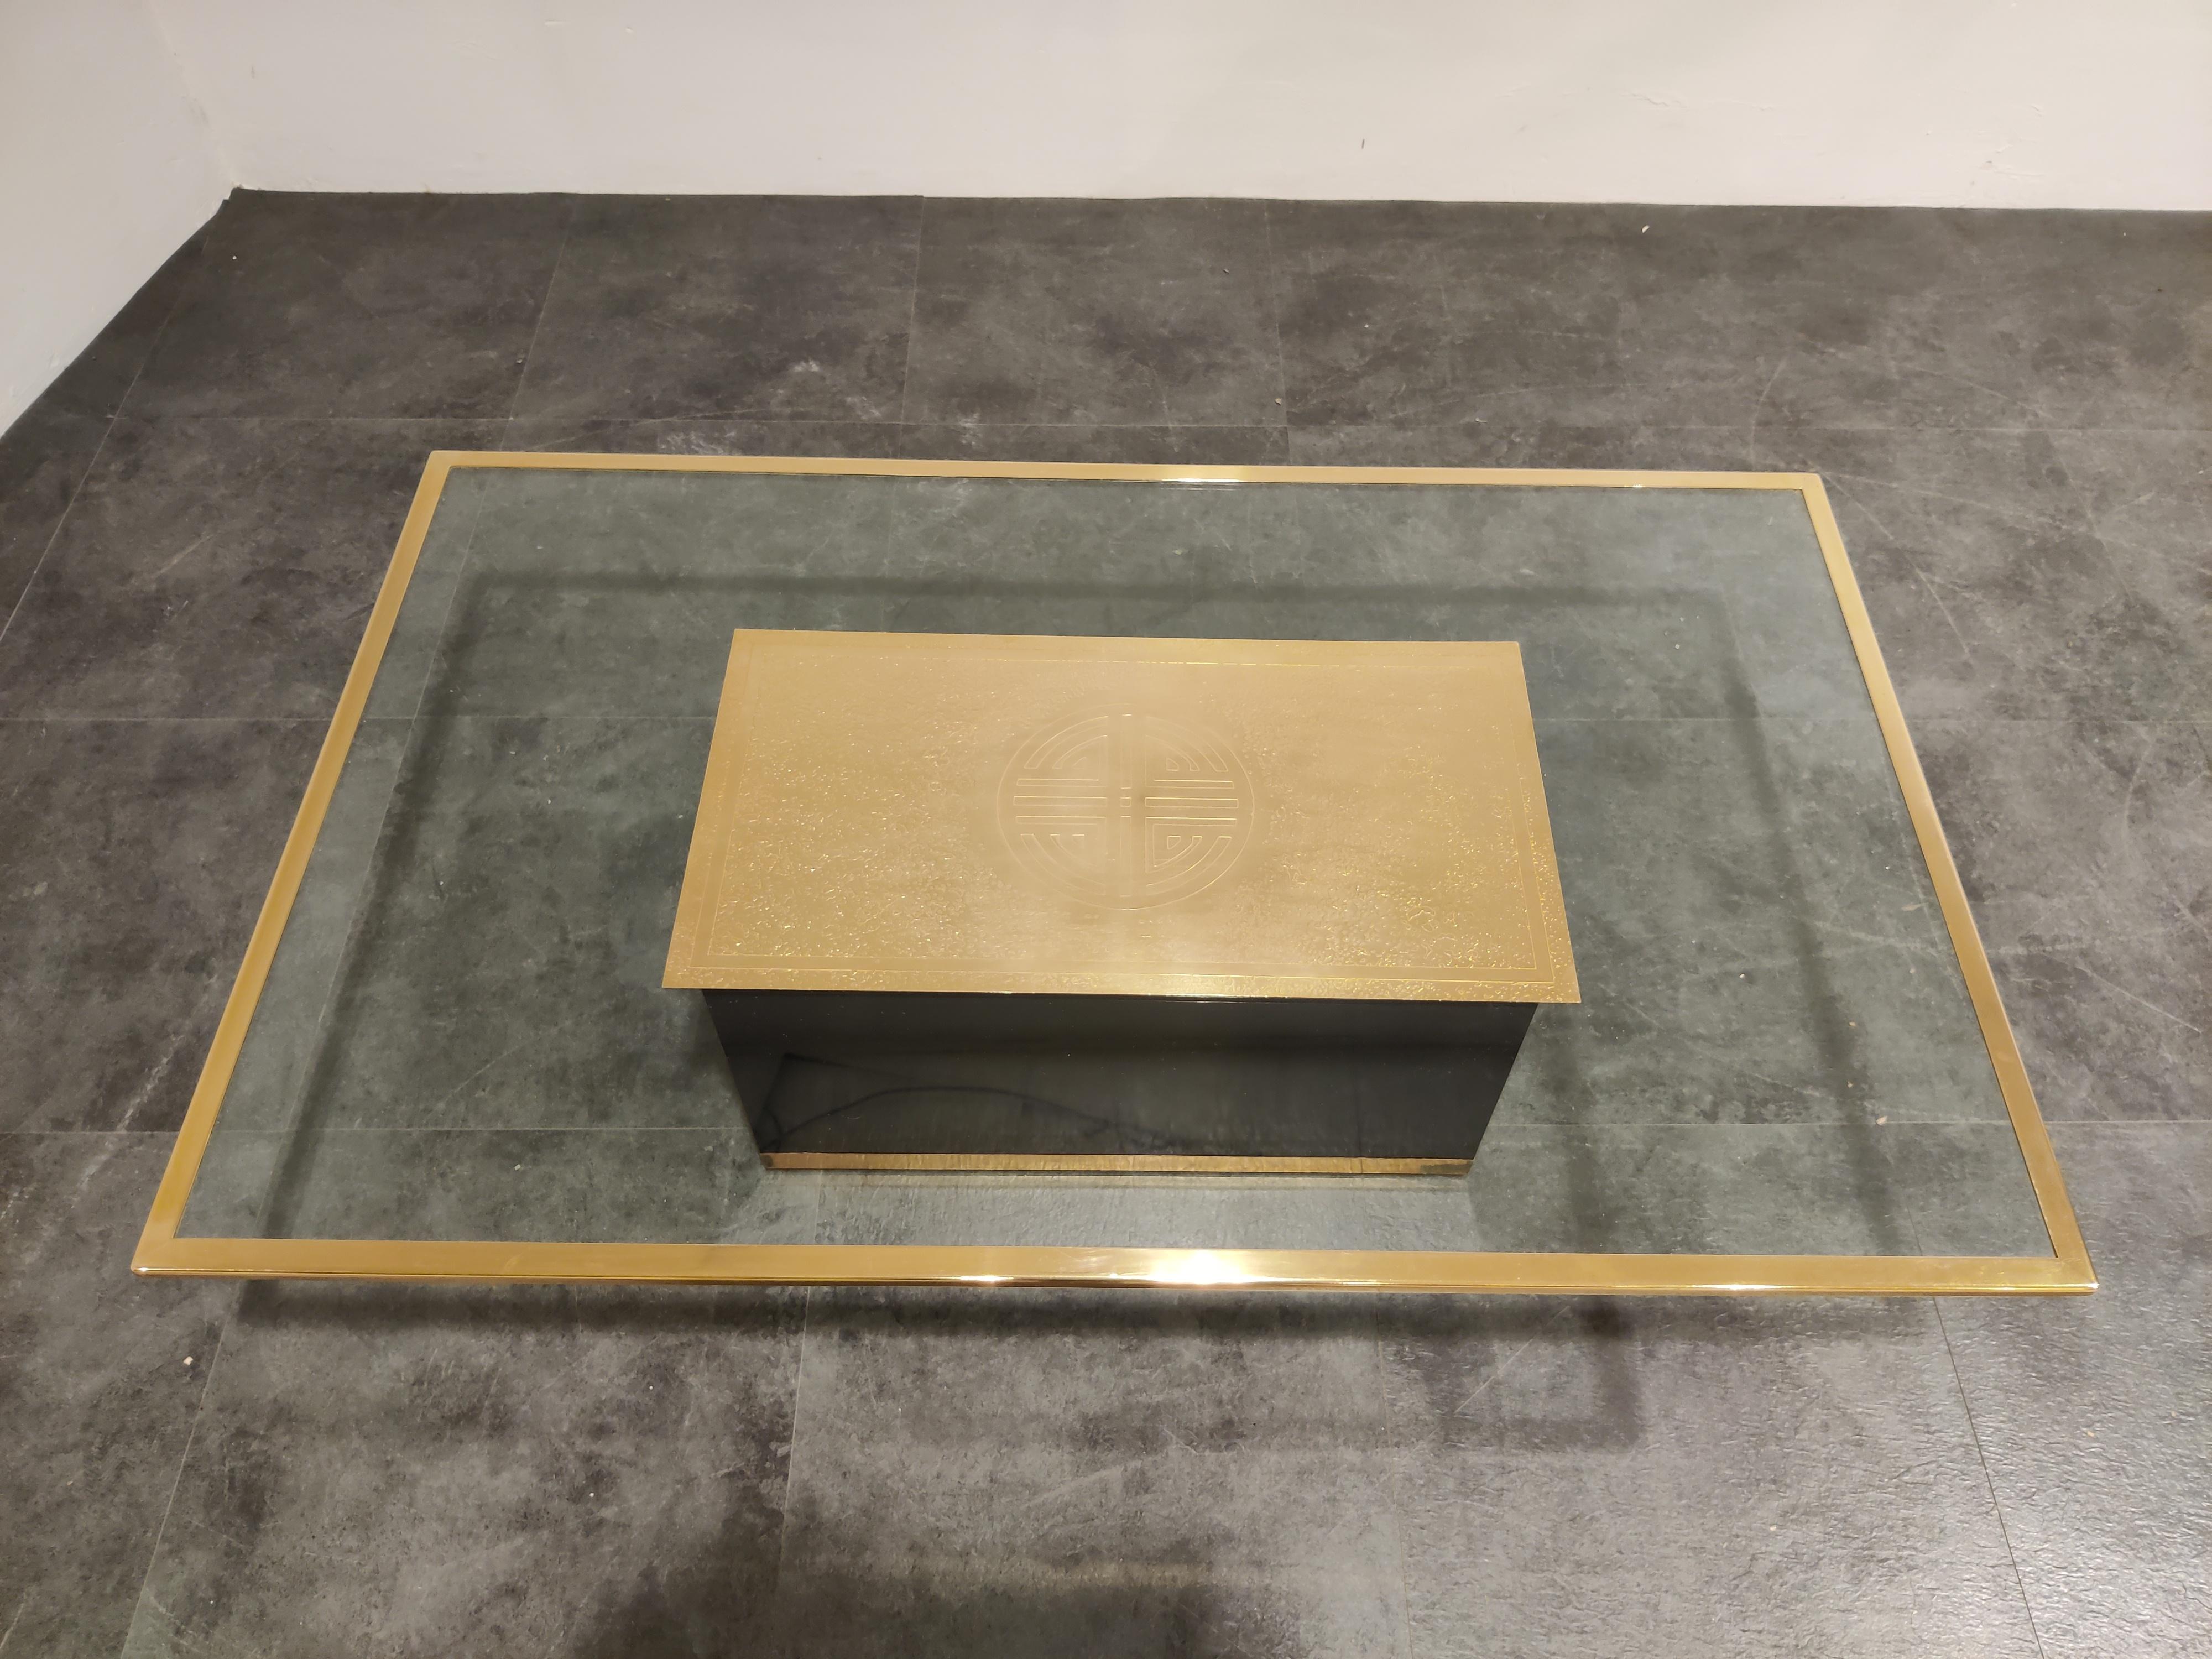 Rectangular coffee table featuring a clear glass top with a brass edge mounted on a black lacquered wooden base with a brass finish. 

The main feature of this coffee table is the etched brass plate signed by Ricco D '185'.

Little is known